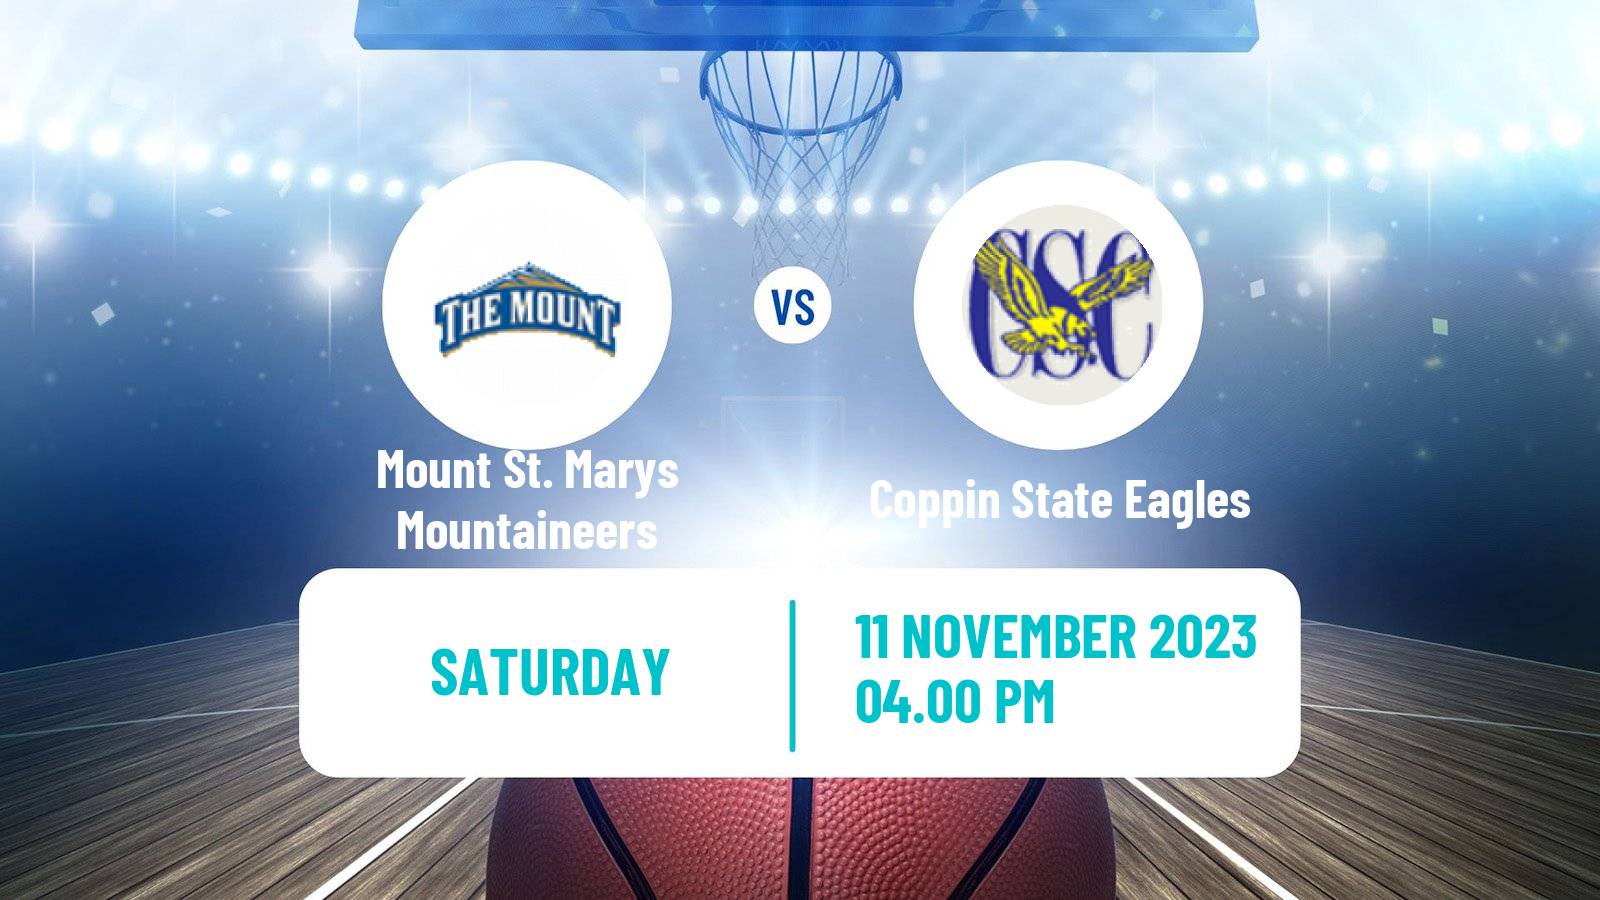 Basketball NCAA College Basketball Mount St. Marys Mountaineers - Coppin State Eagles